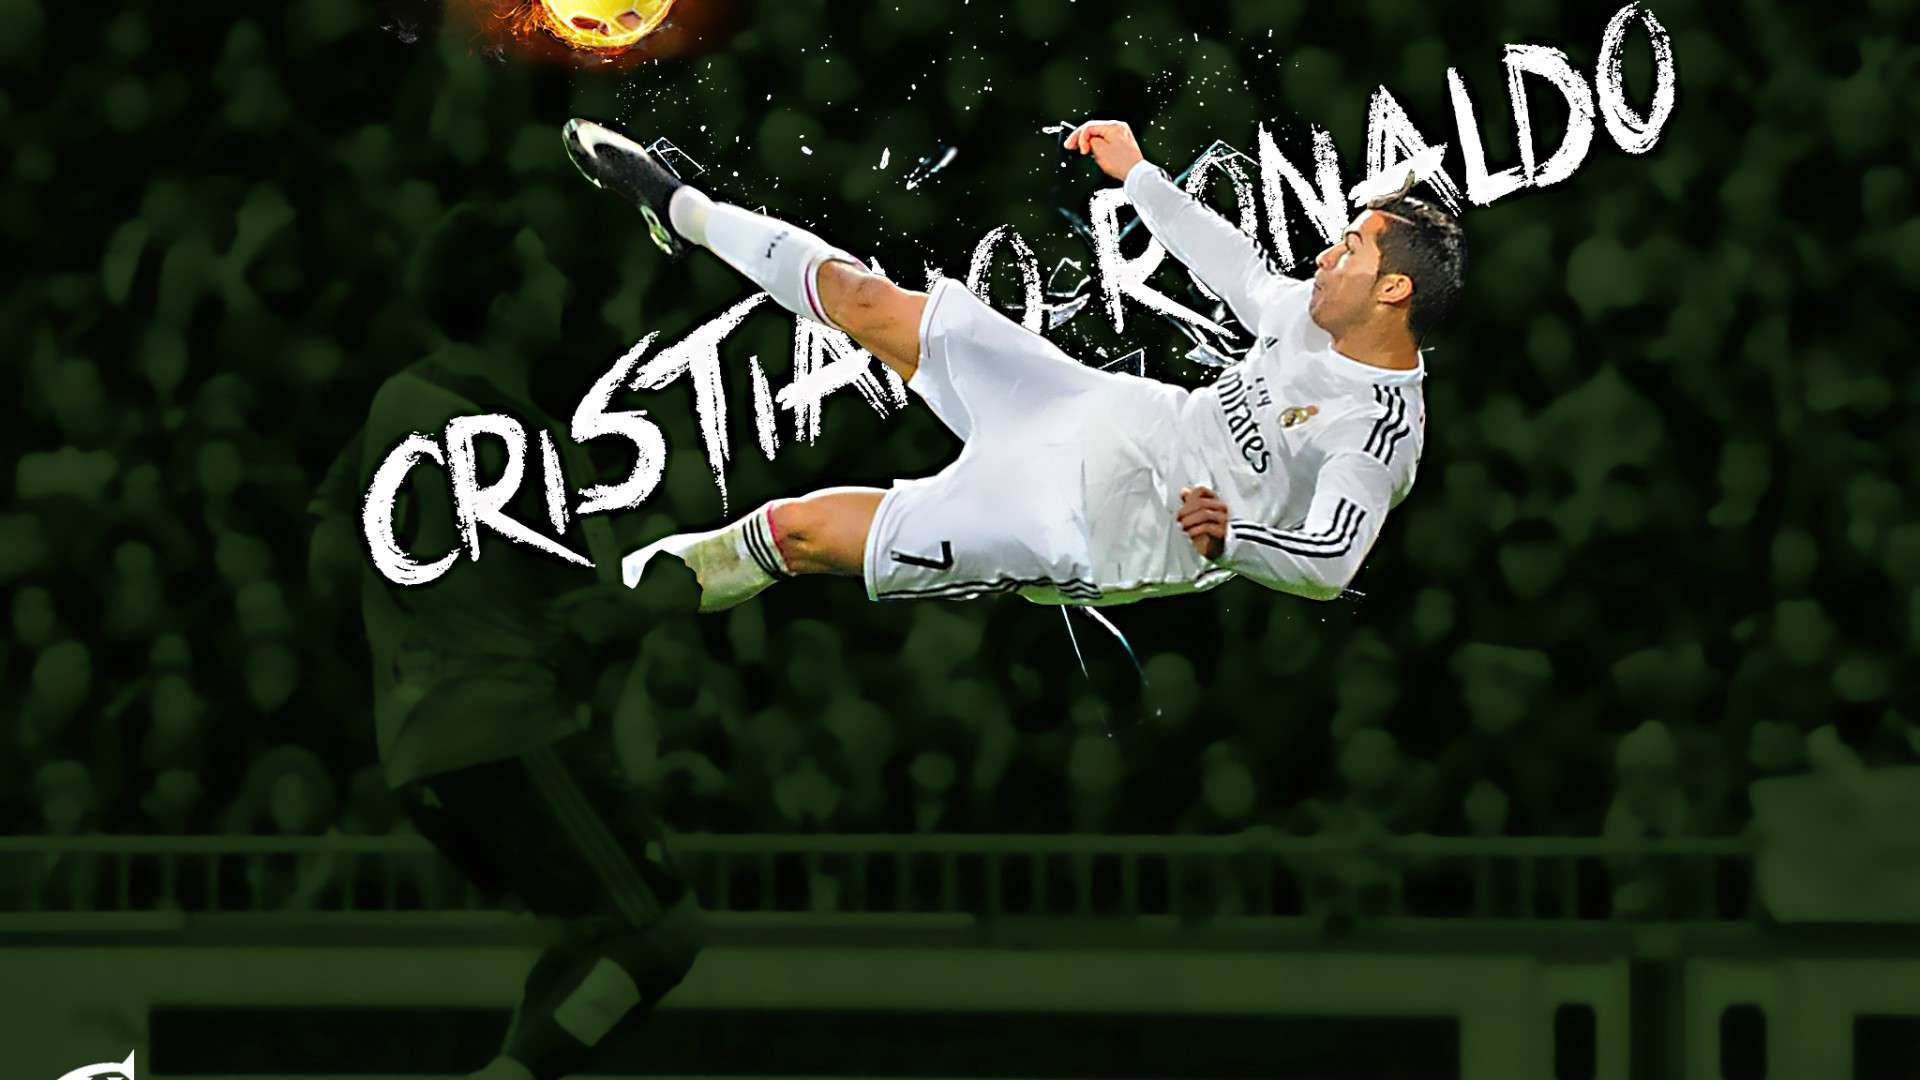 Ronaldo Football Wallpapers HD | Wallpapers, Backgrounds, Images ...